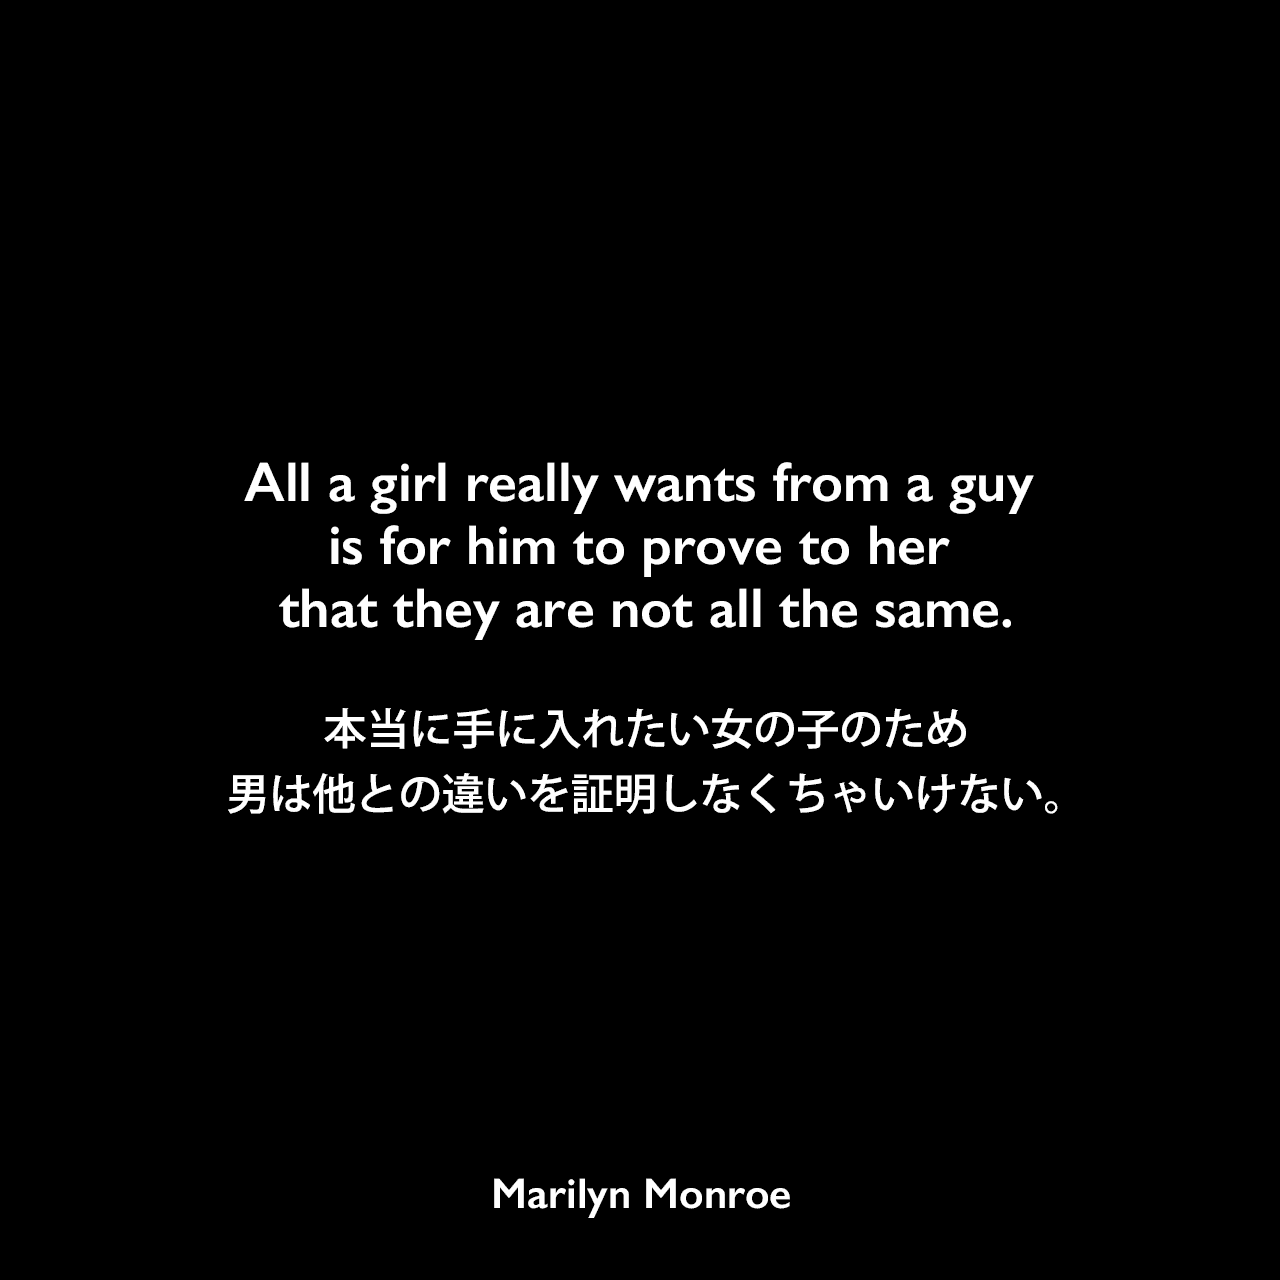 All a girl really wants from a guy is for him to prove to her that they are not all the same.本当に手に入れたい女の子のため、男は他との違いを証明しなくちゃいけない。